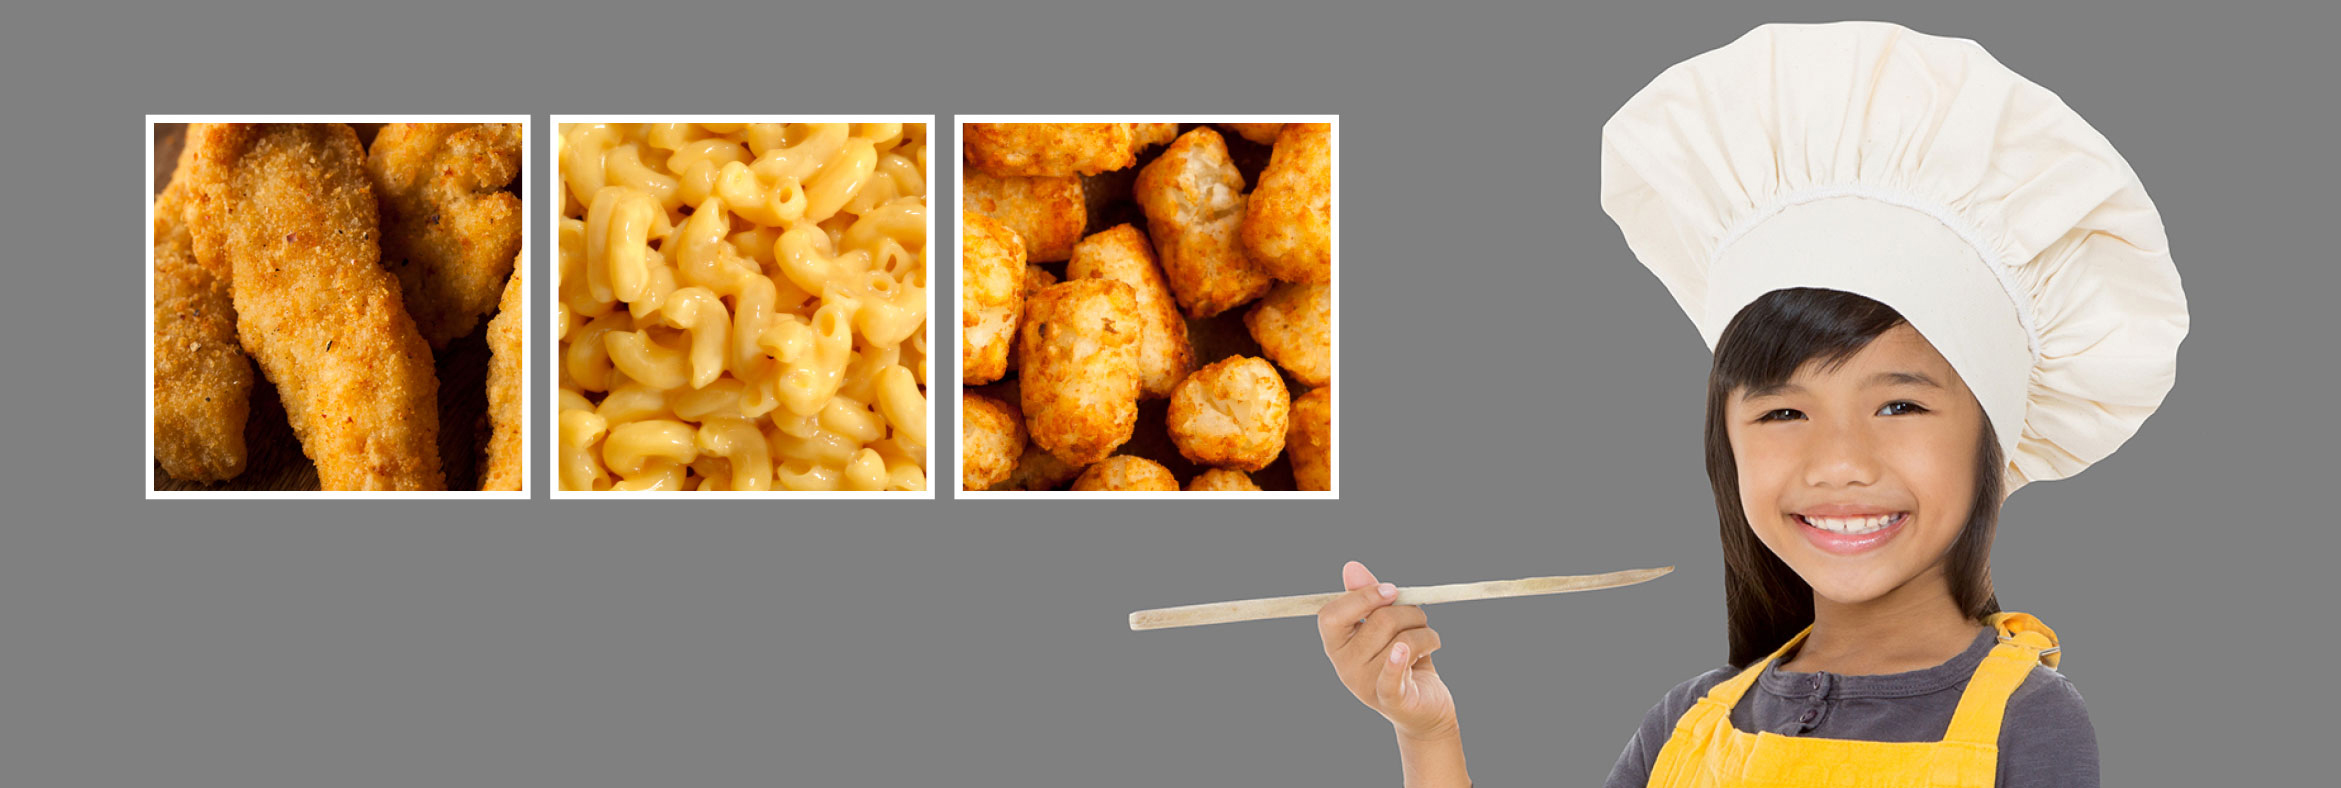 A child chef with chicken tenders, macaroni and cheese, and tater tots